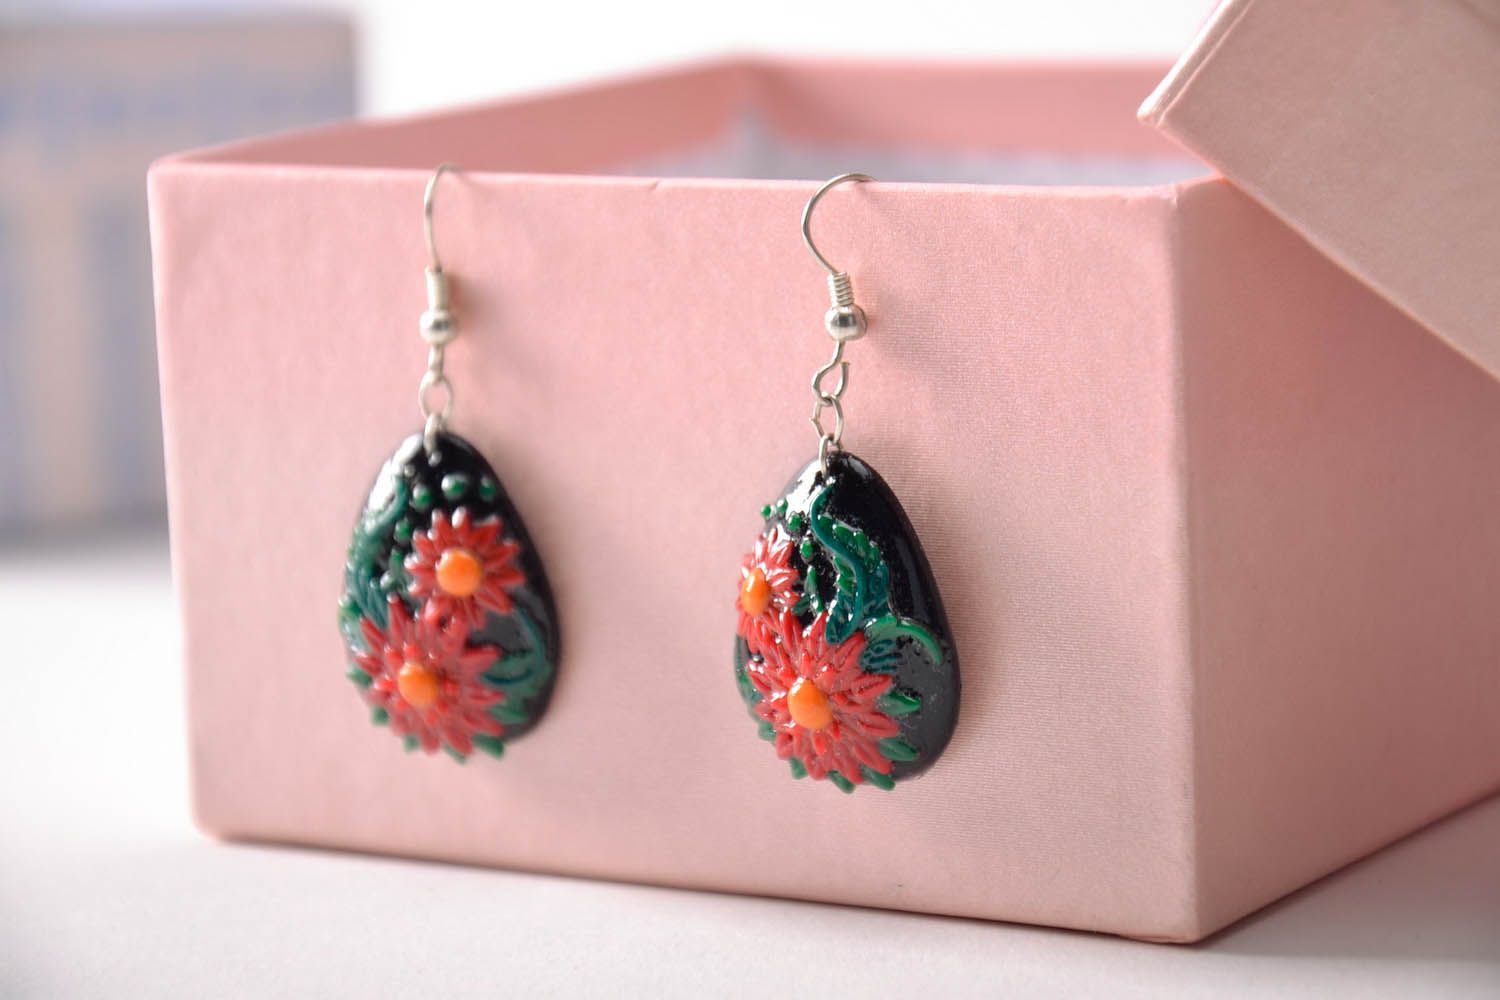 Pendant earrings made of polymer clay photo 3